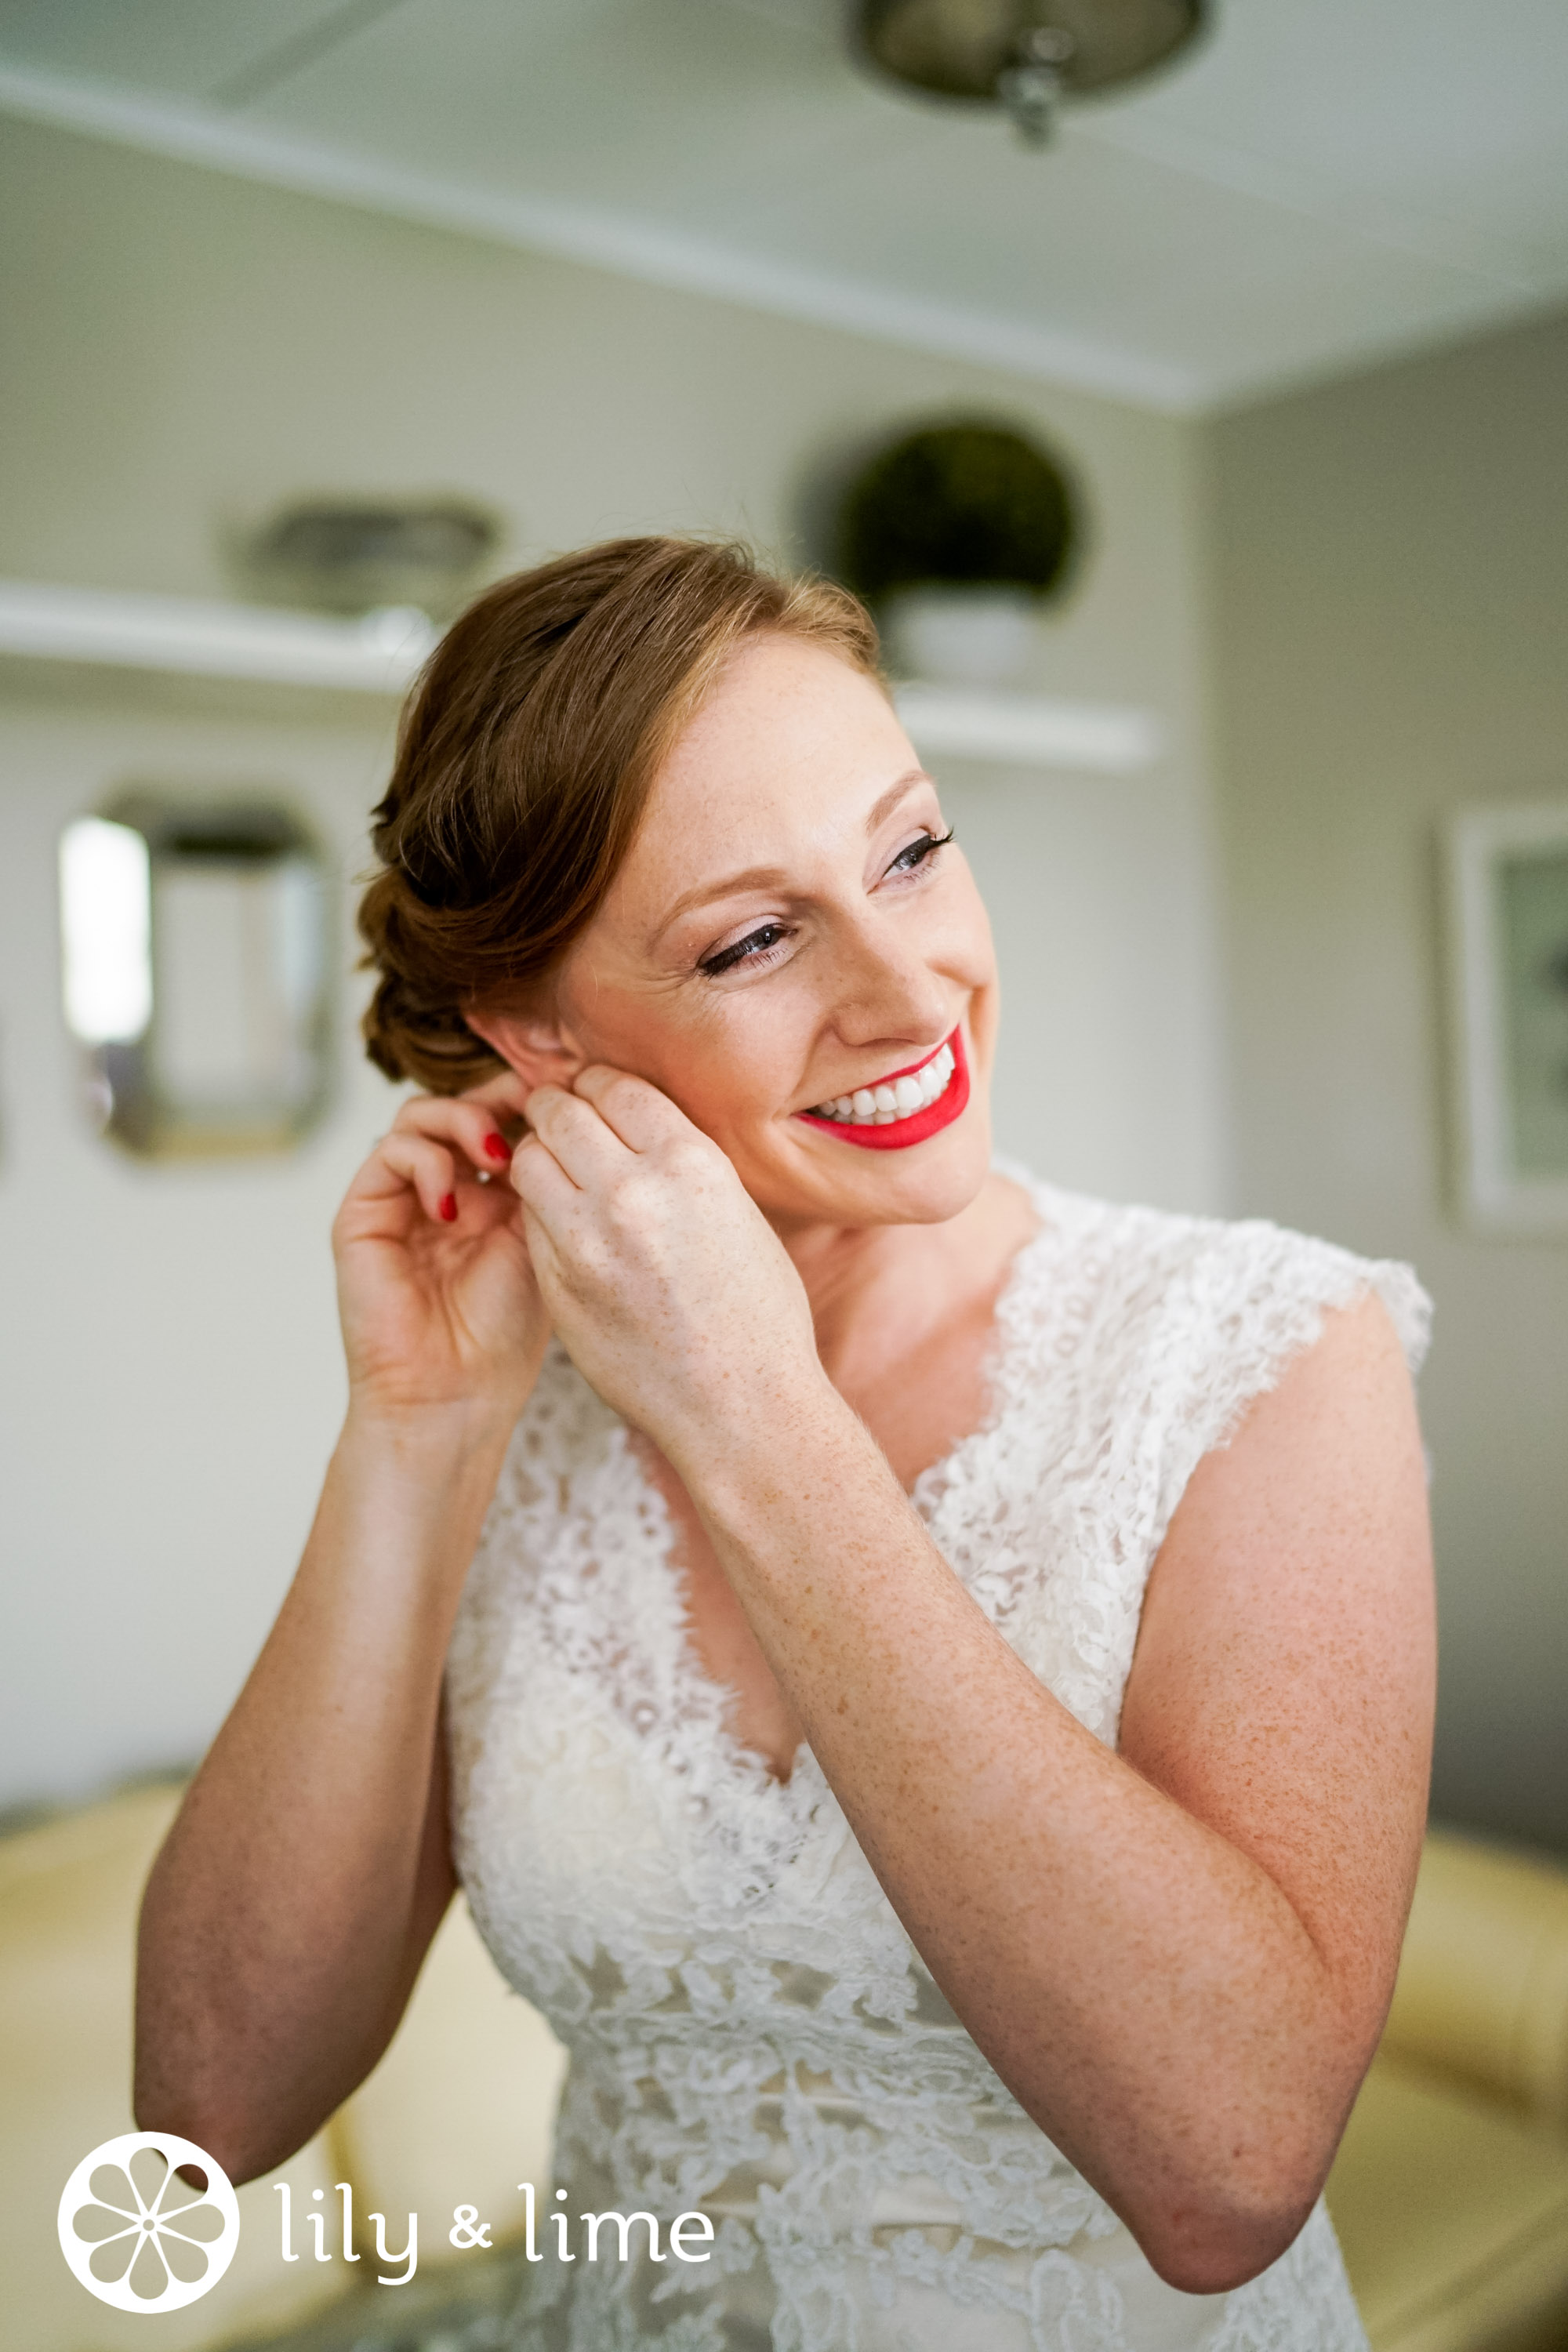 reasons why you should hire a professional wedding photographer